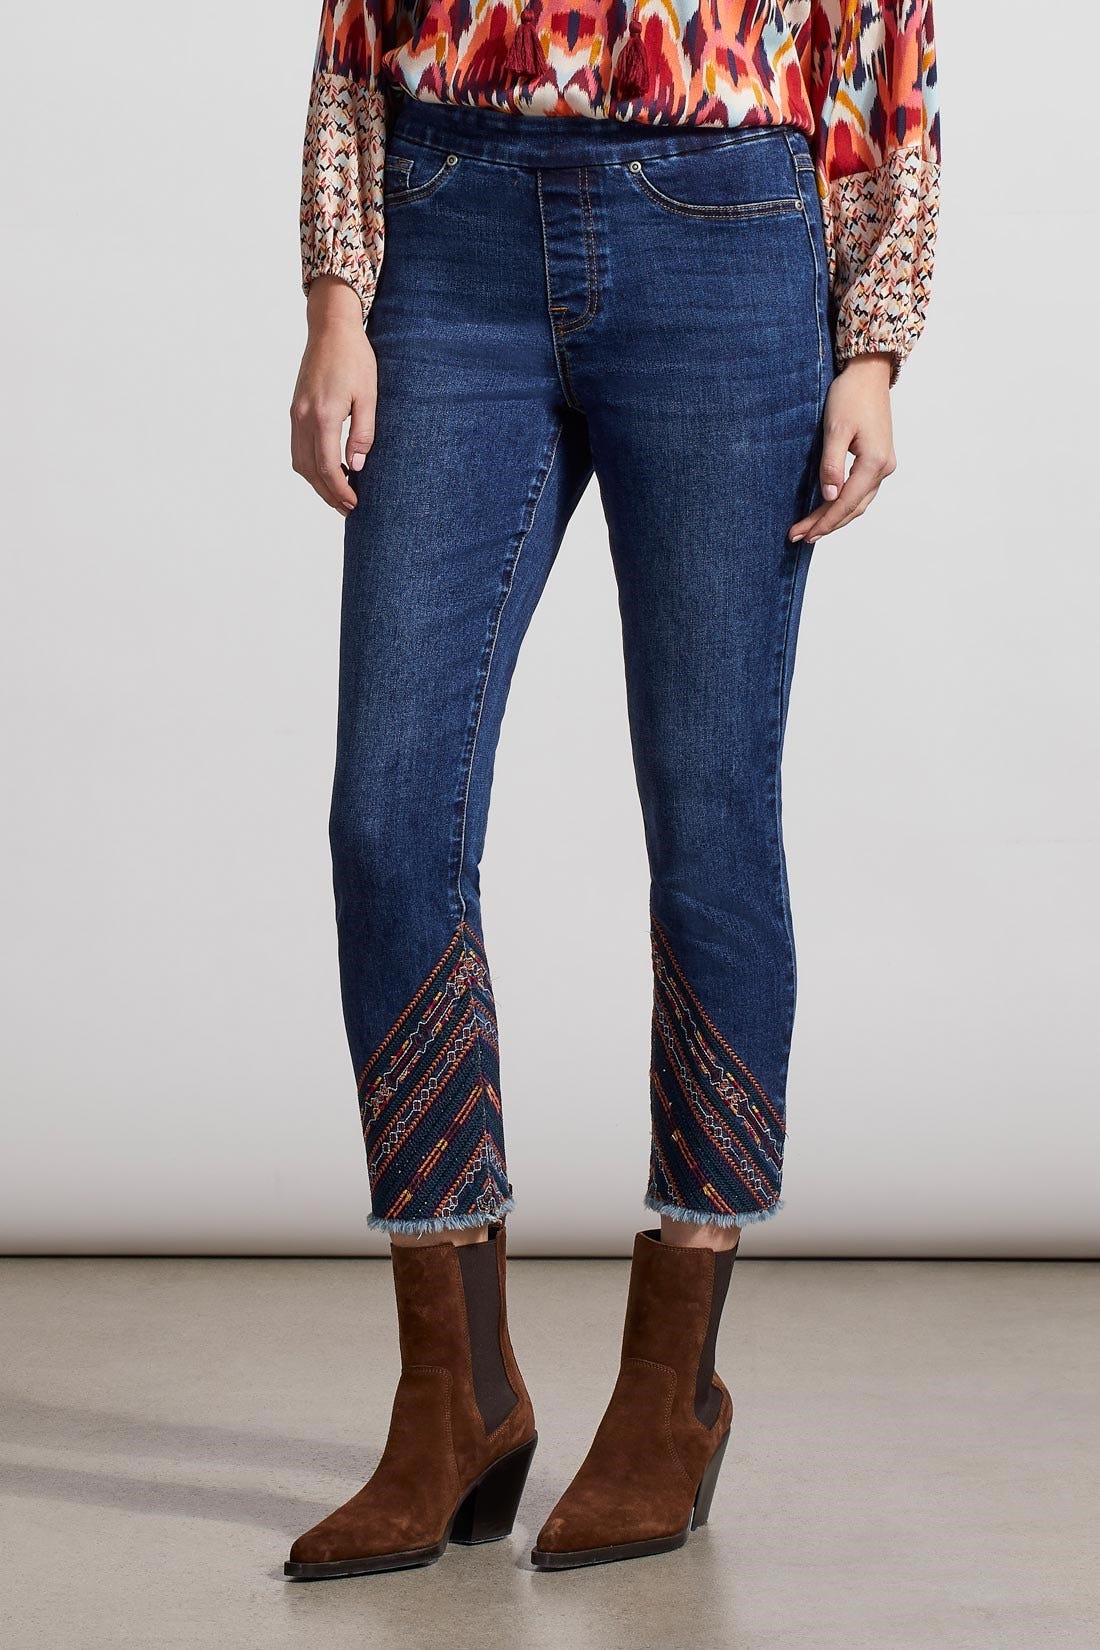 Audrey Pull On Fancy Embroidered Slim Ankle - FINAL SALE